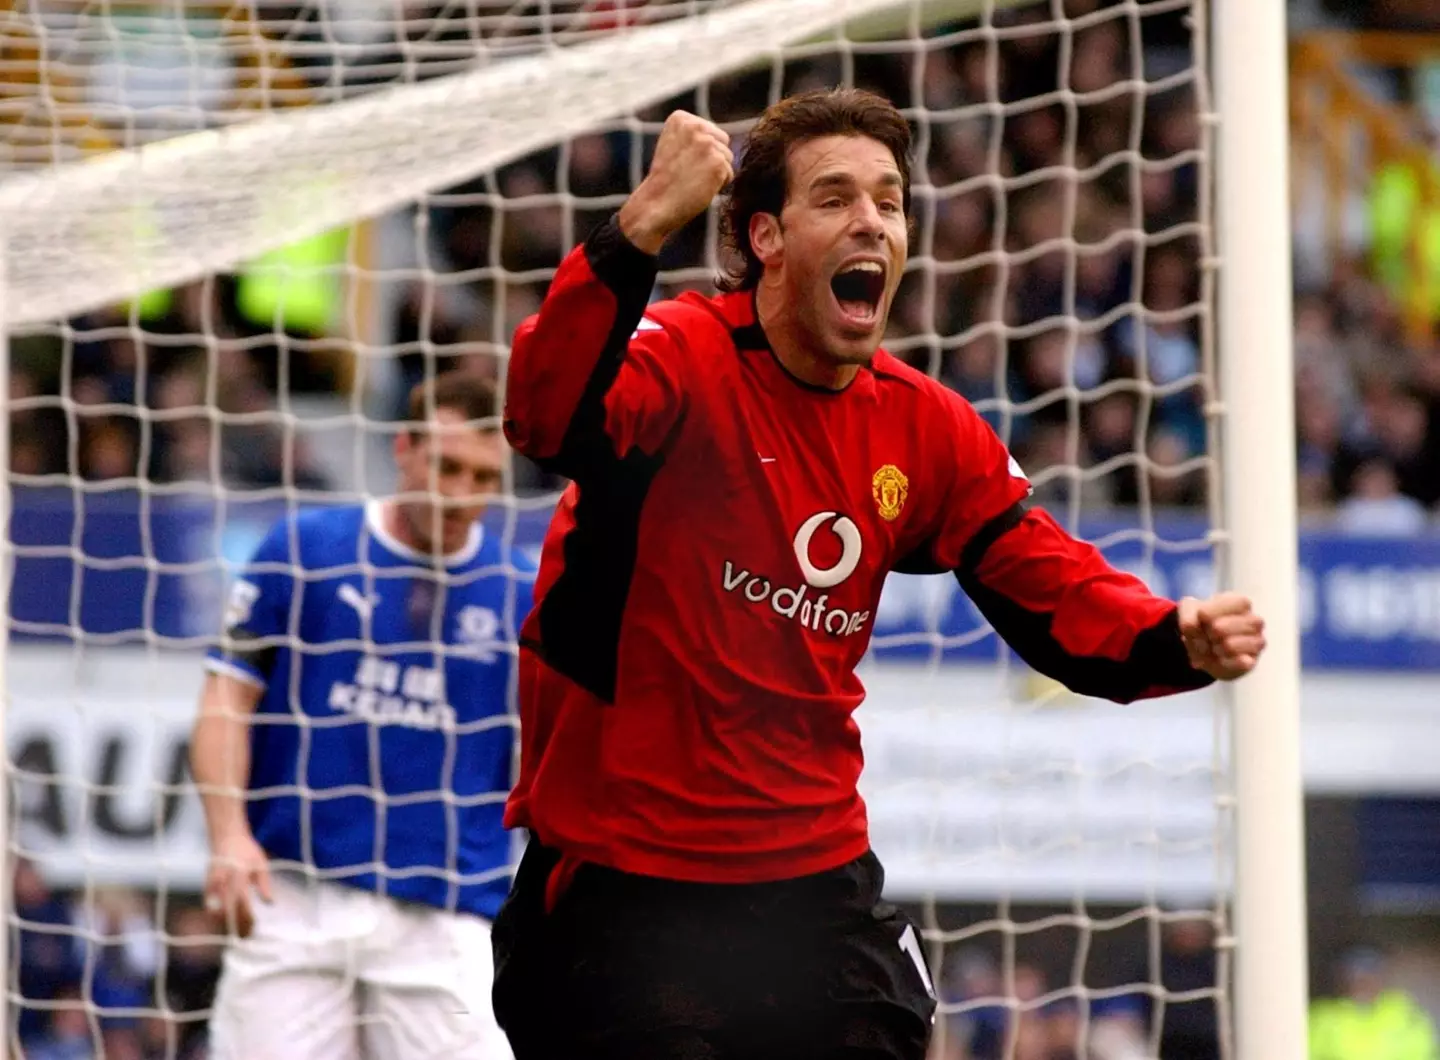 Van Nistelrooy played for United between 2001 and 2006. (Image